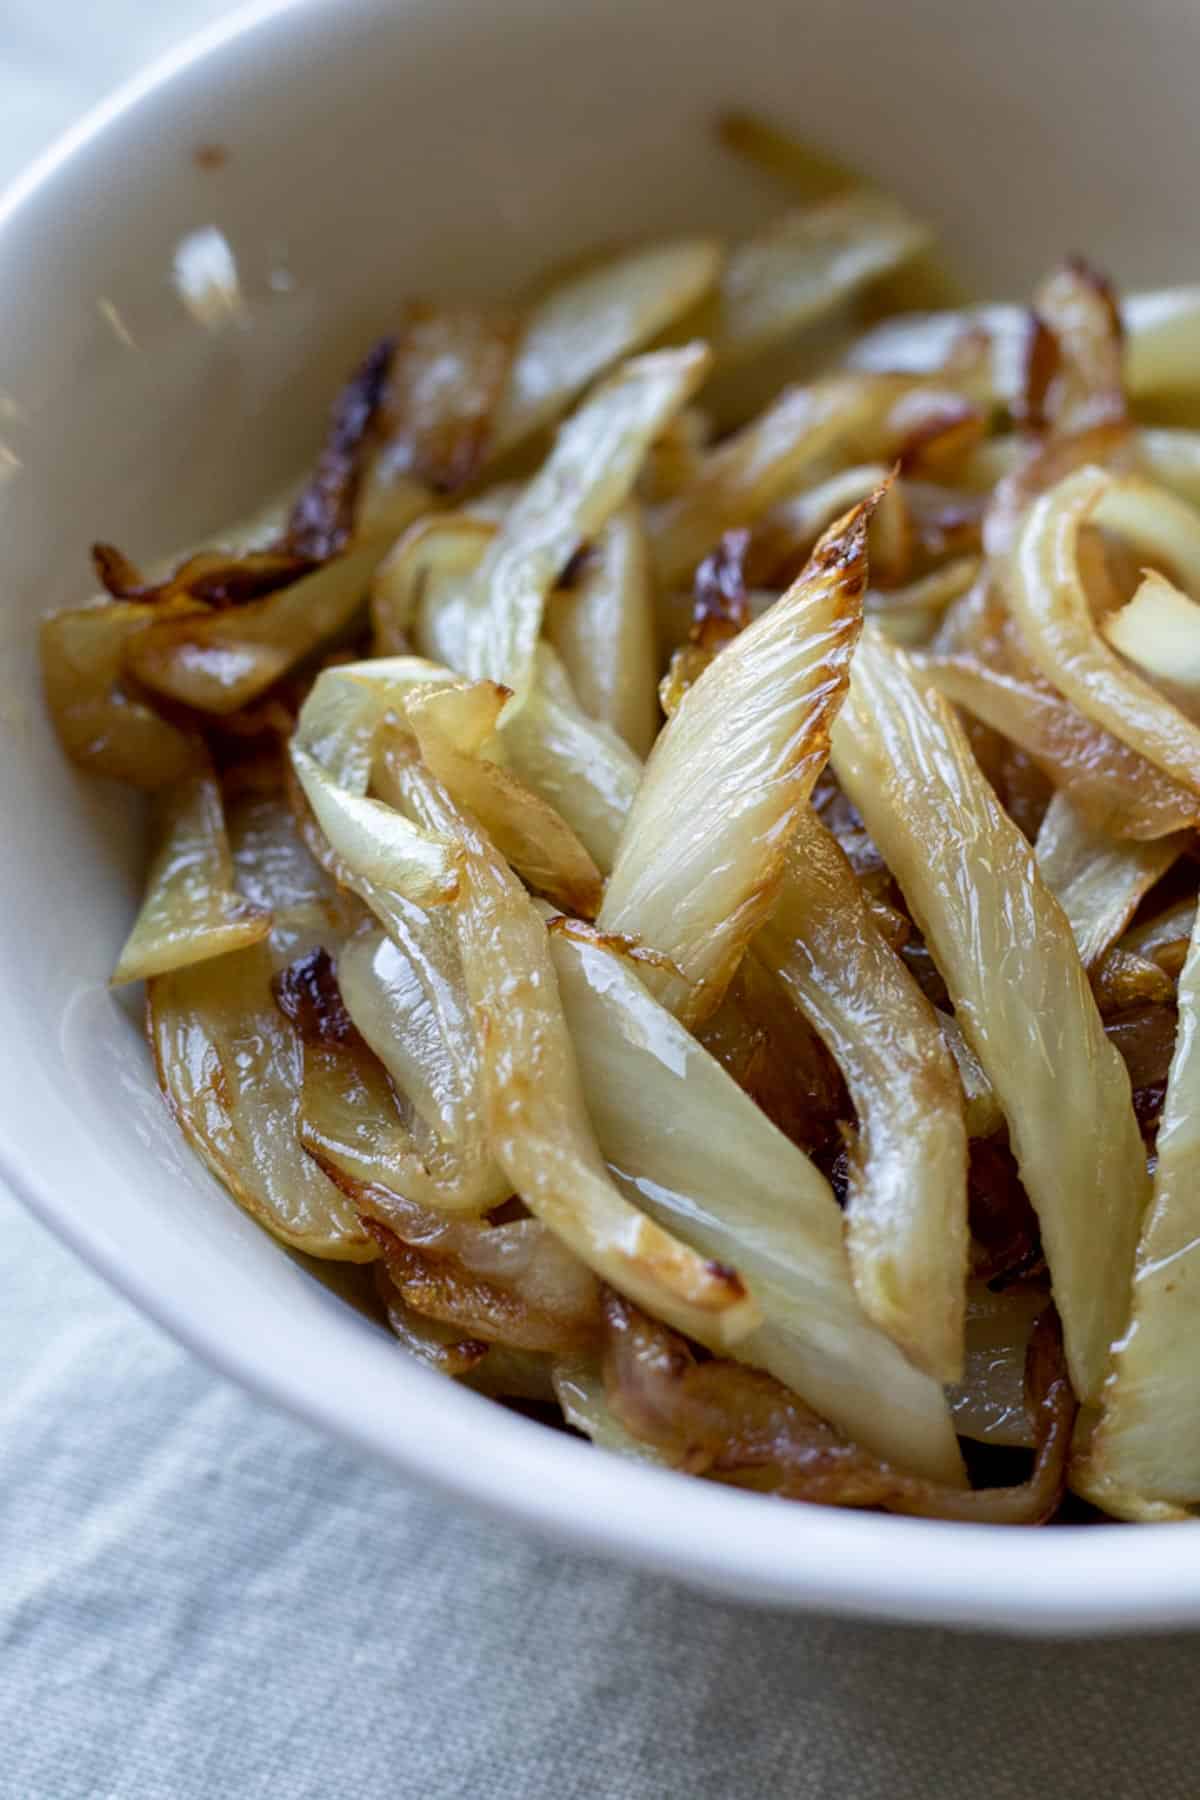 caramelized fennel and onion in a bowl.